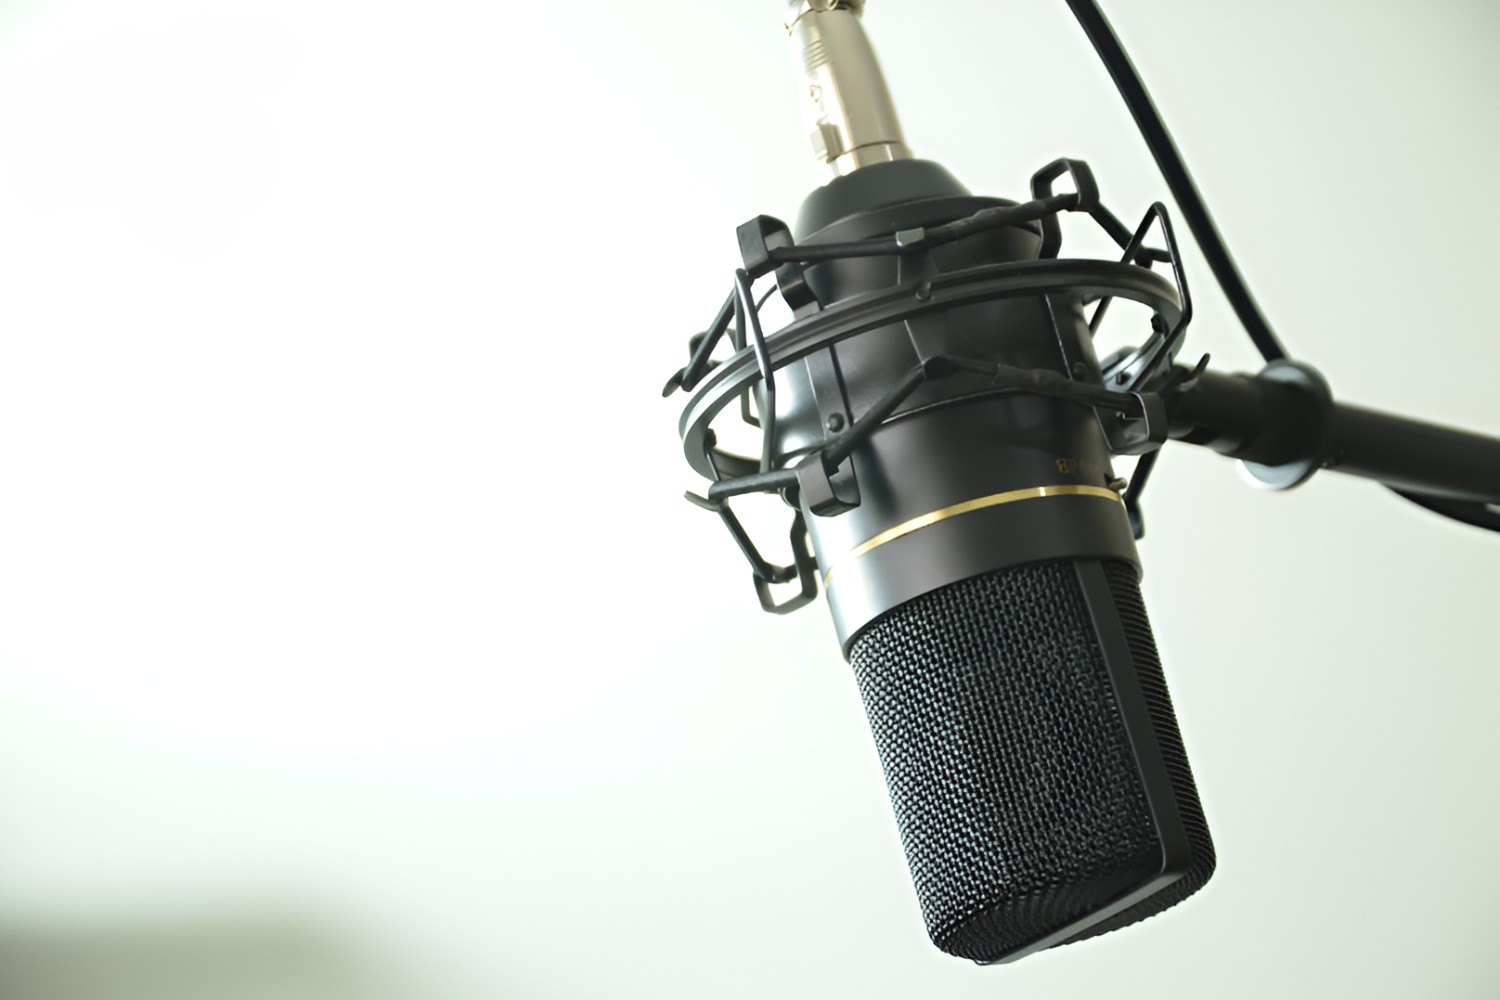 USB Condenser Microphone: How To Use